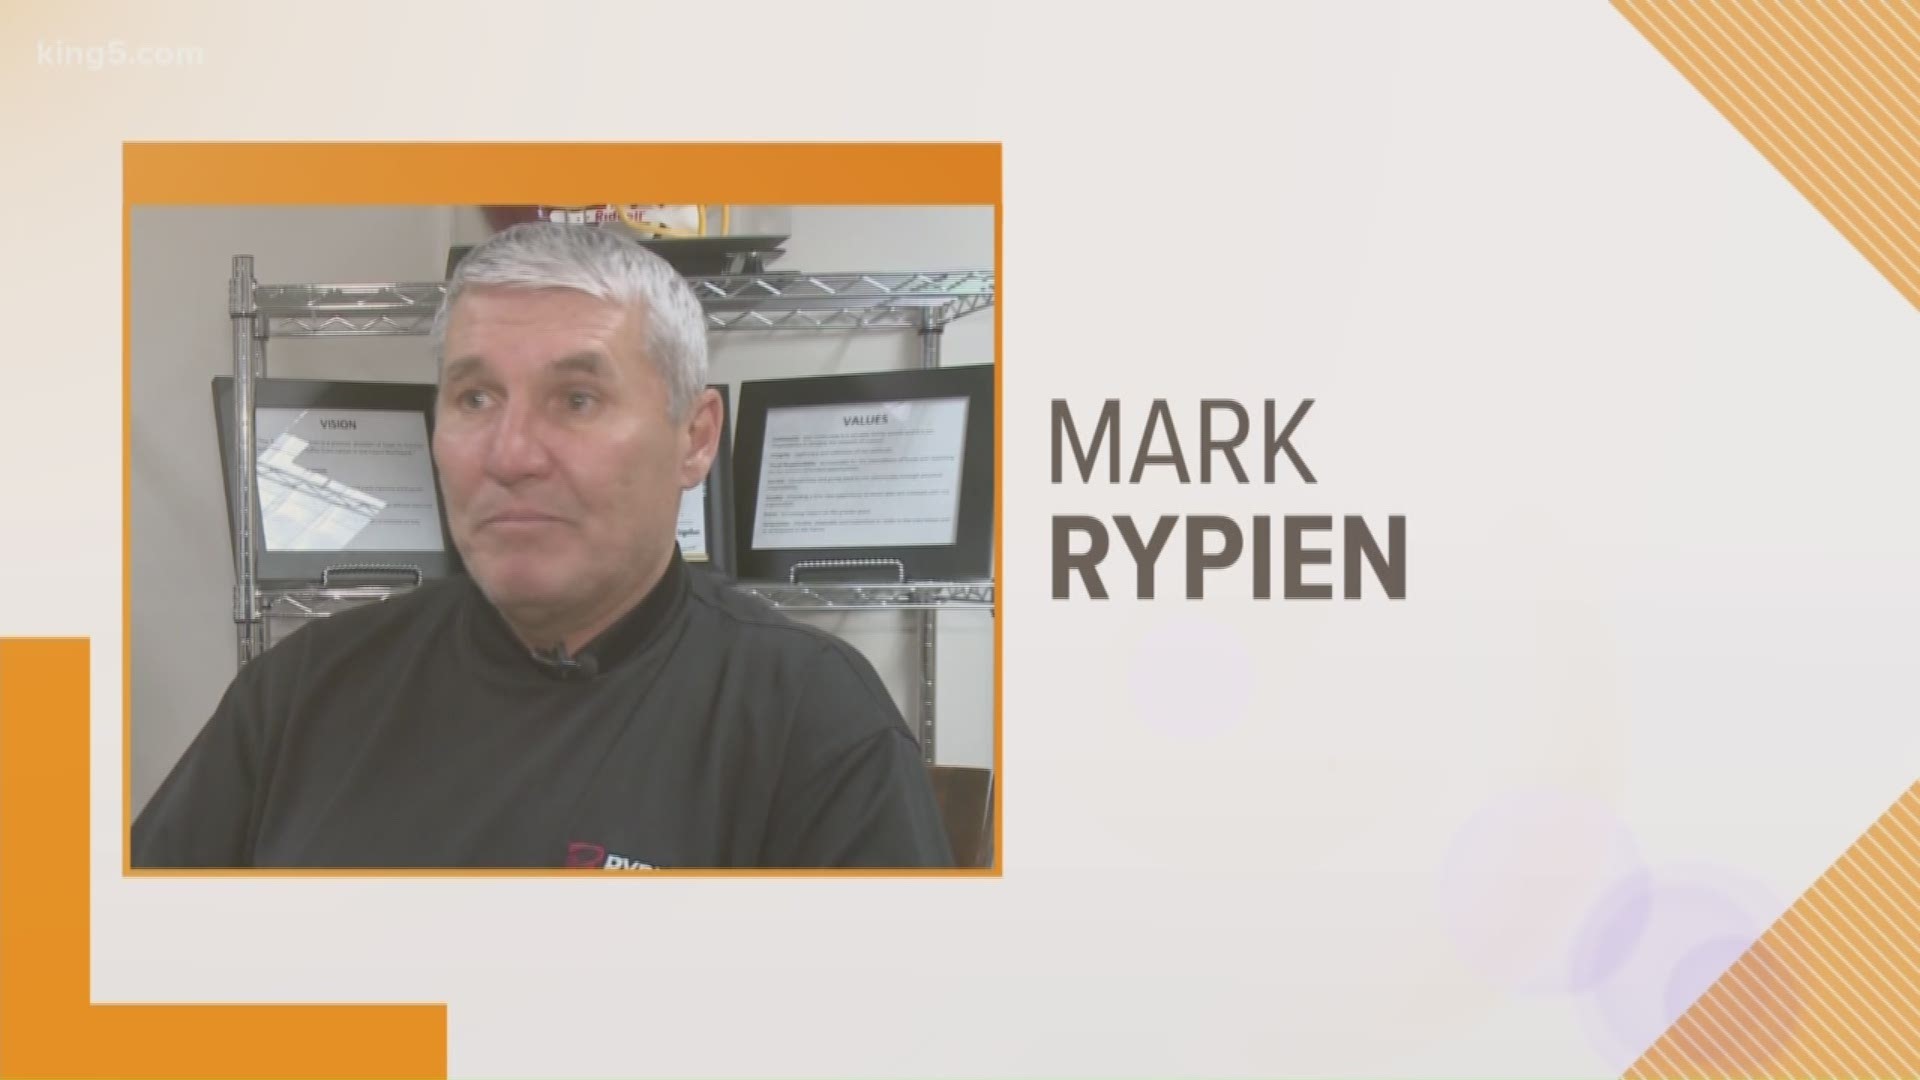 Former WSU quarterback and Super Bowl MVP Mark Rypien was booked into Spokane County Jail Sunday night for assault.